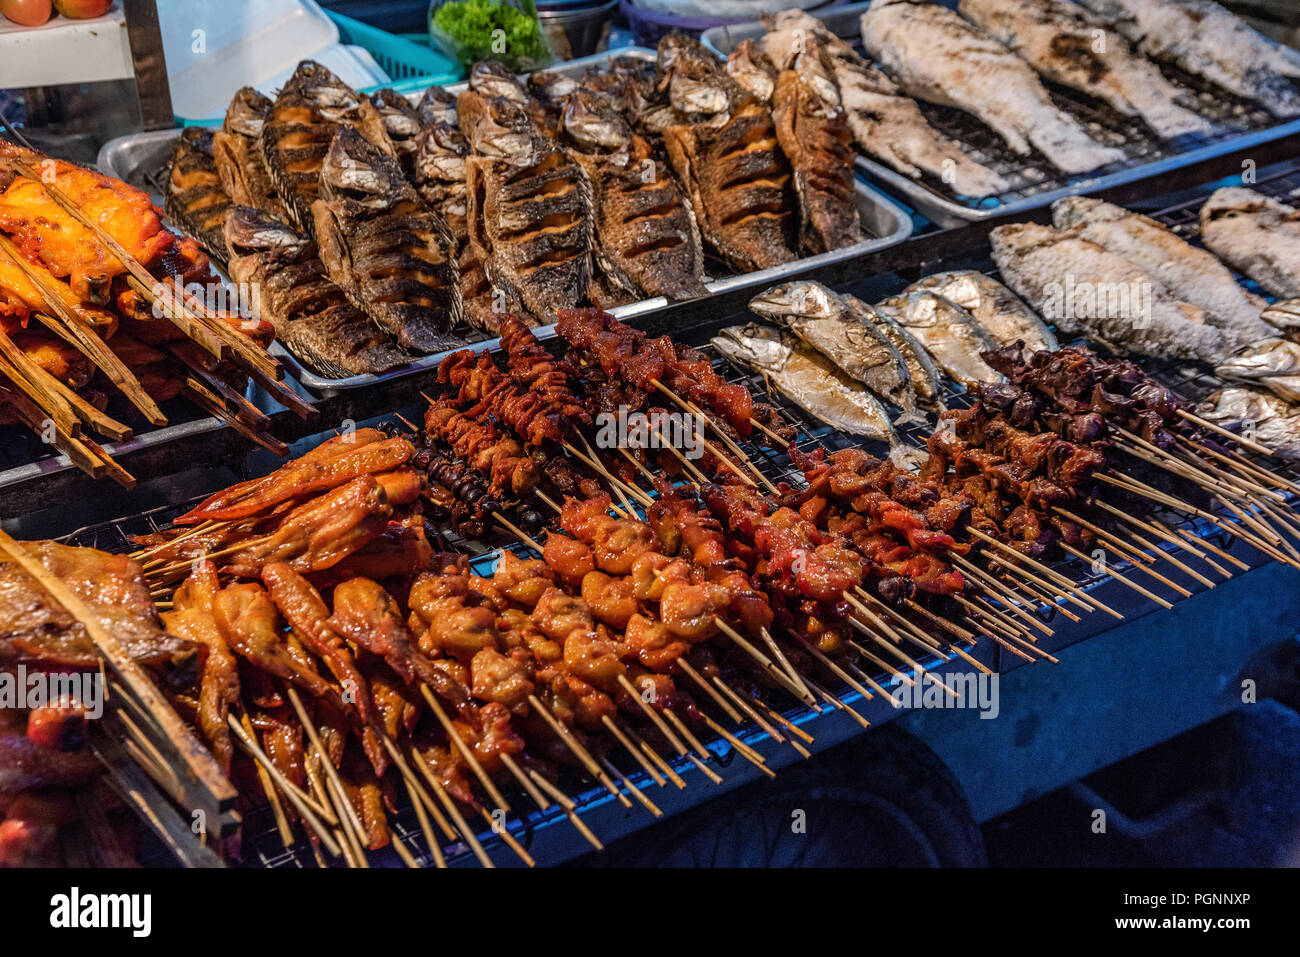 Thai barbecue street food stand Stock Photo